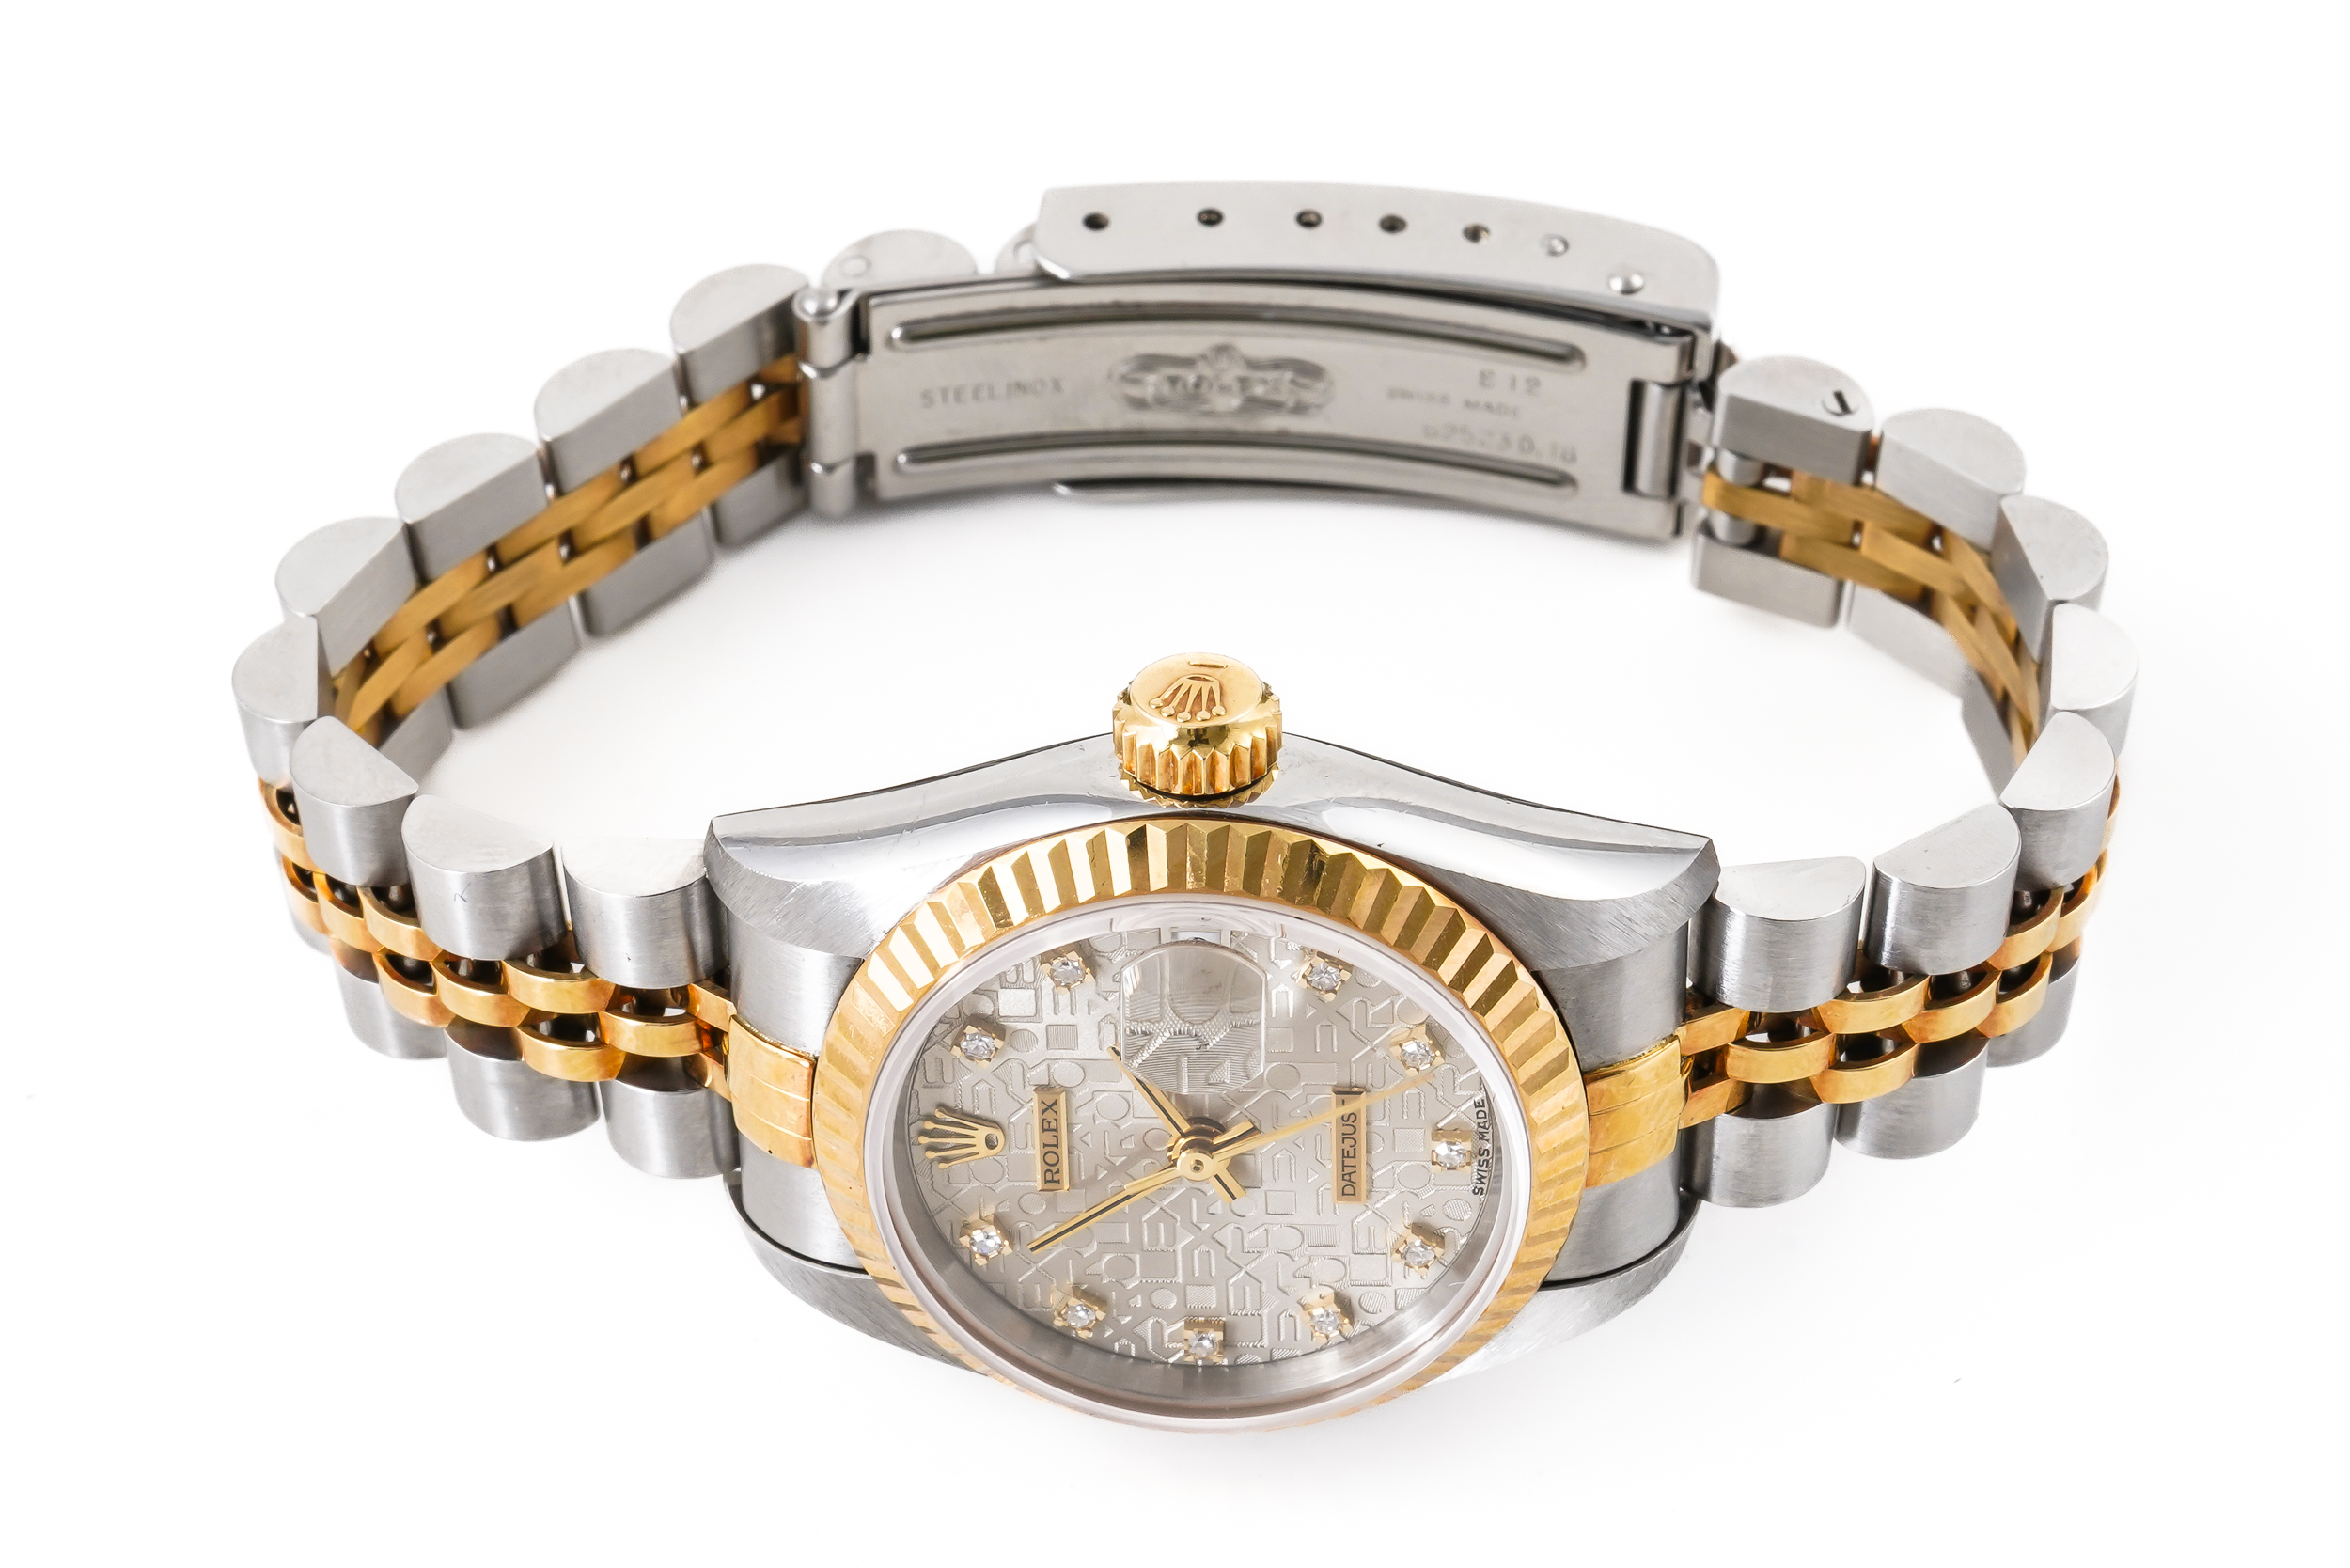 A LADY'S STEEL AND GOLD DATEJUST ROLEX WRISTWATCH - Image 2 of 6